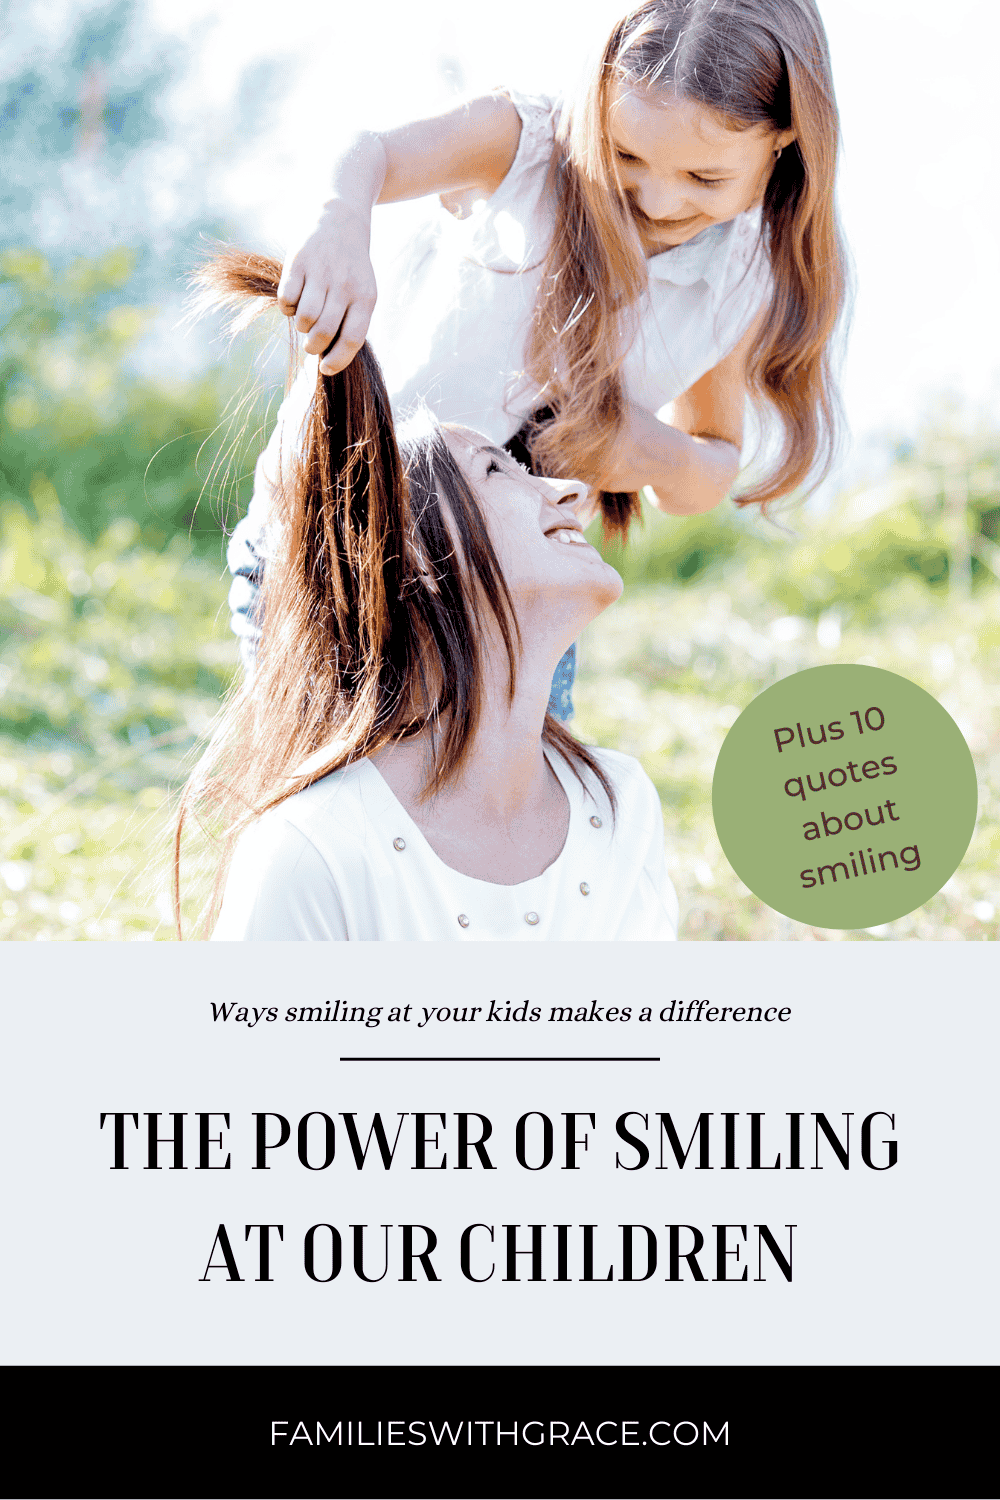 The power of smiling